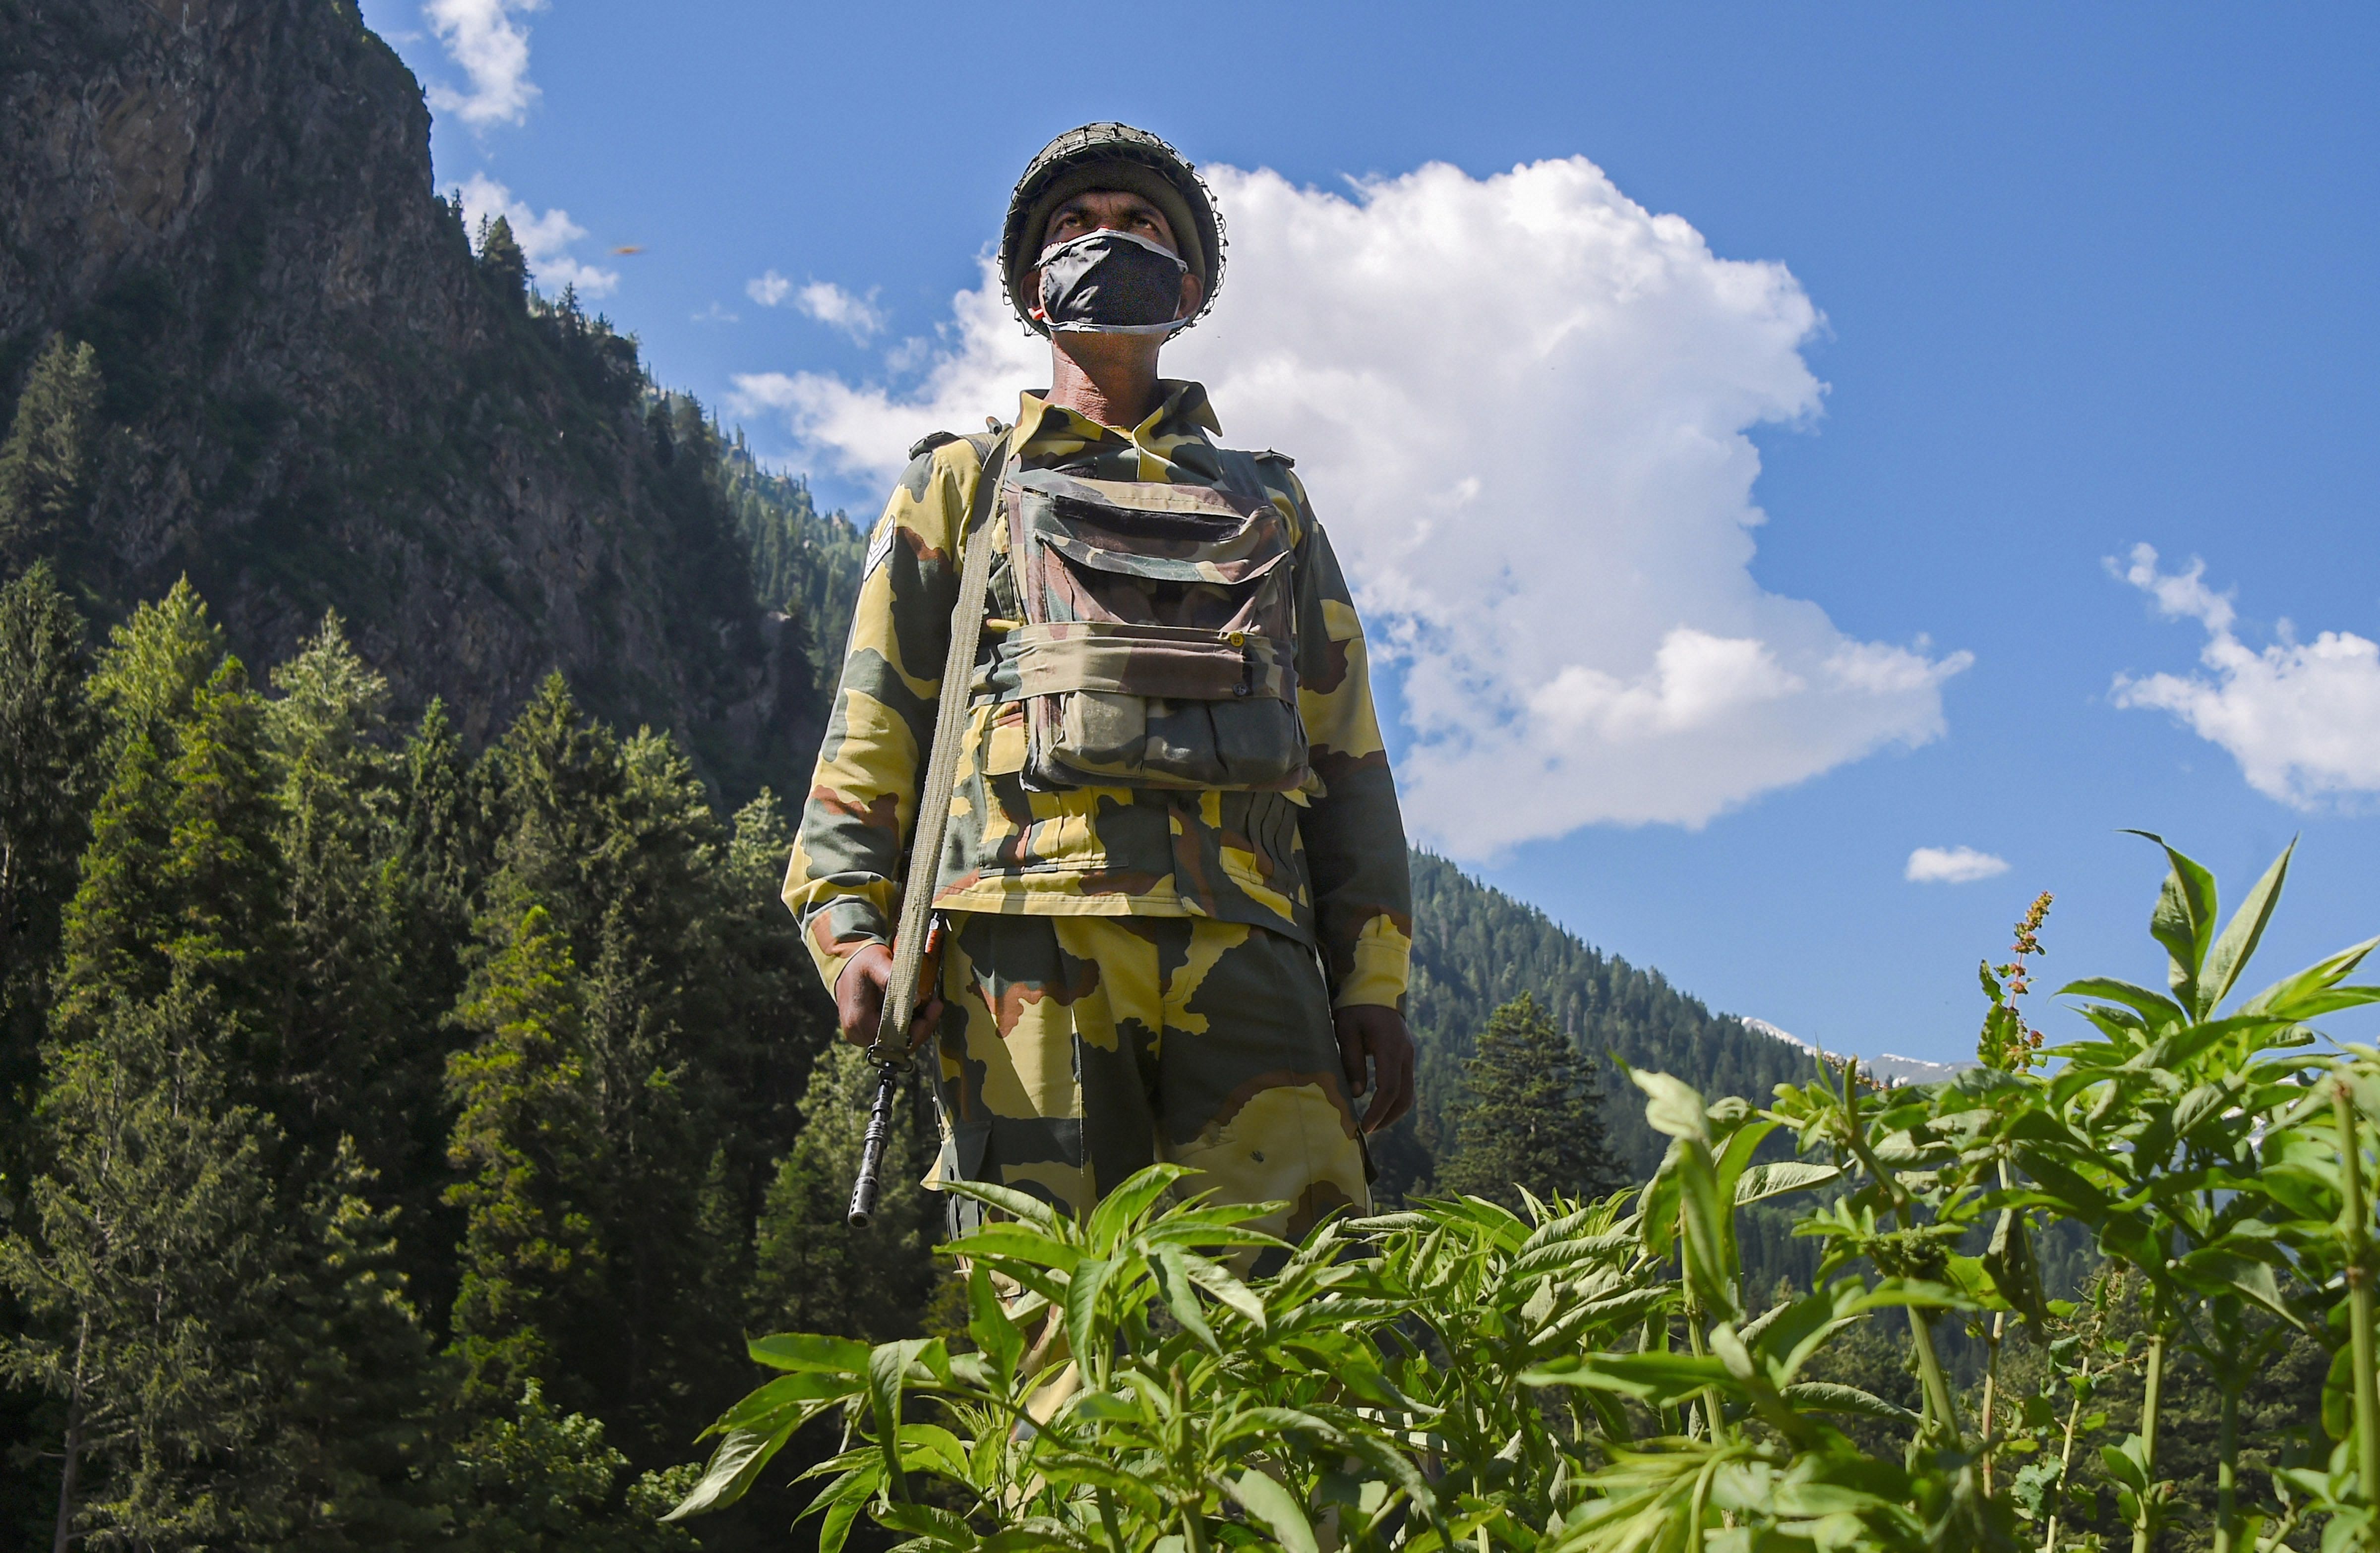 A Border Security Force (BSF) personnel stands guard along the Srinagar-Leh National highway, in Ganderbal district of Central Kashmir, Wednesday, June 17, 2020. Representative image/Credit: PTI File Photo